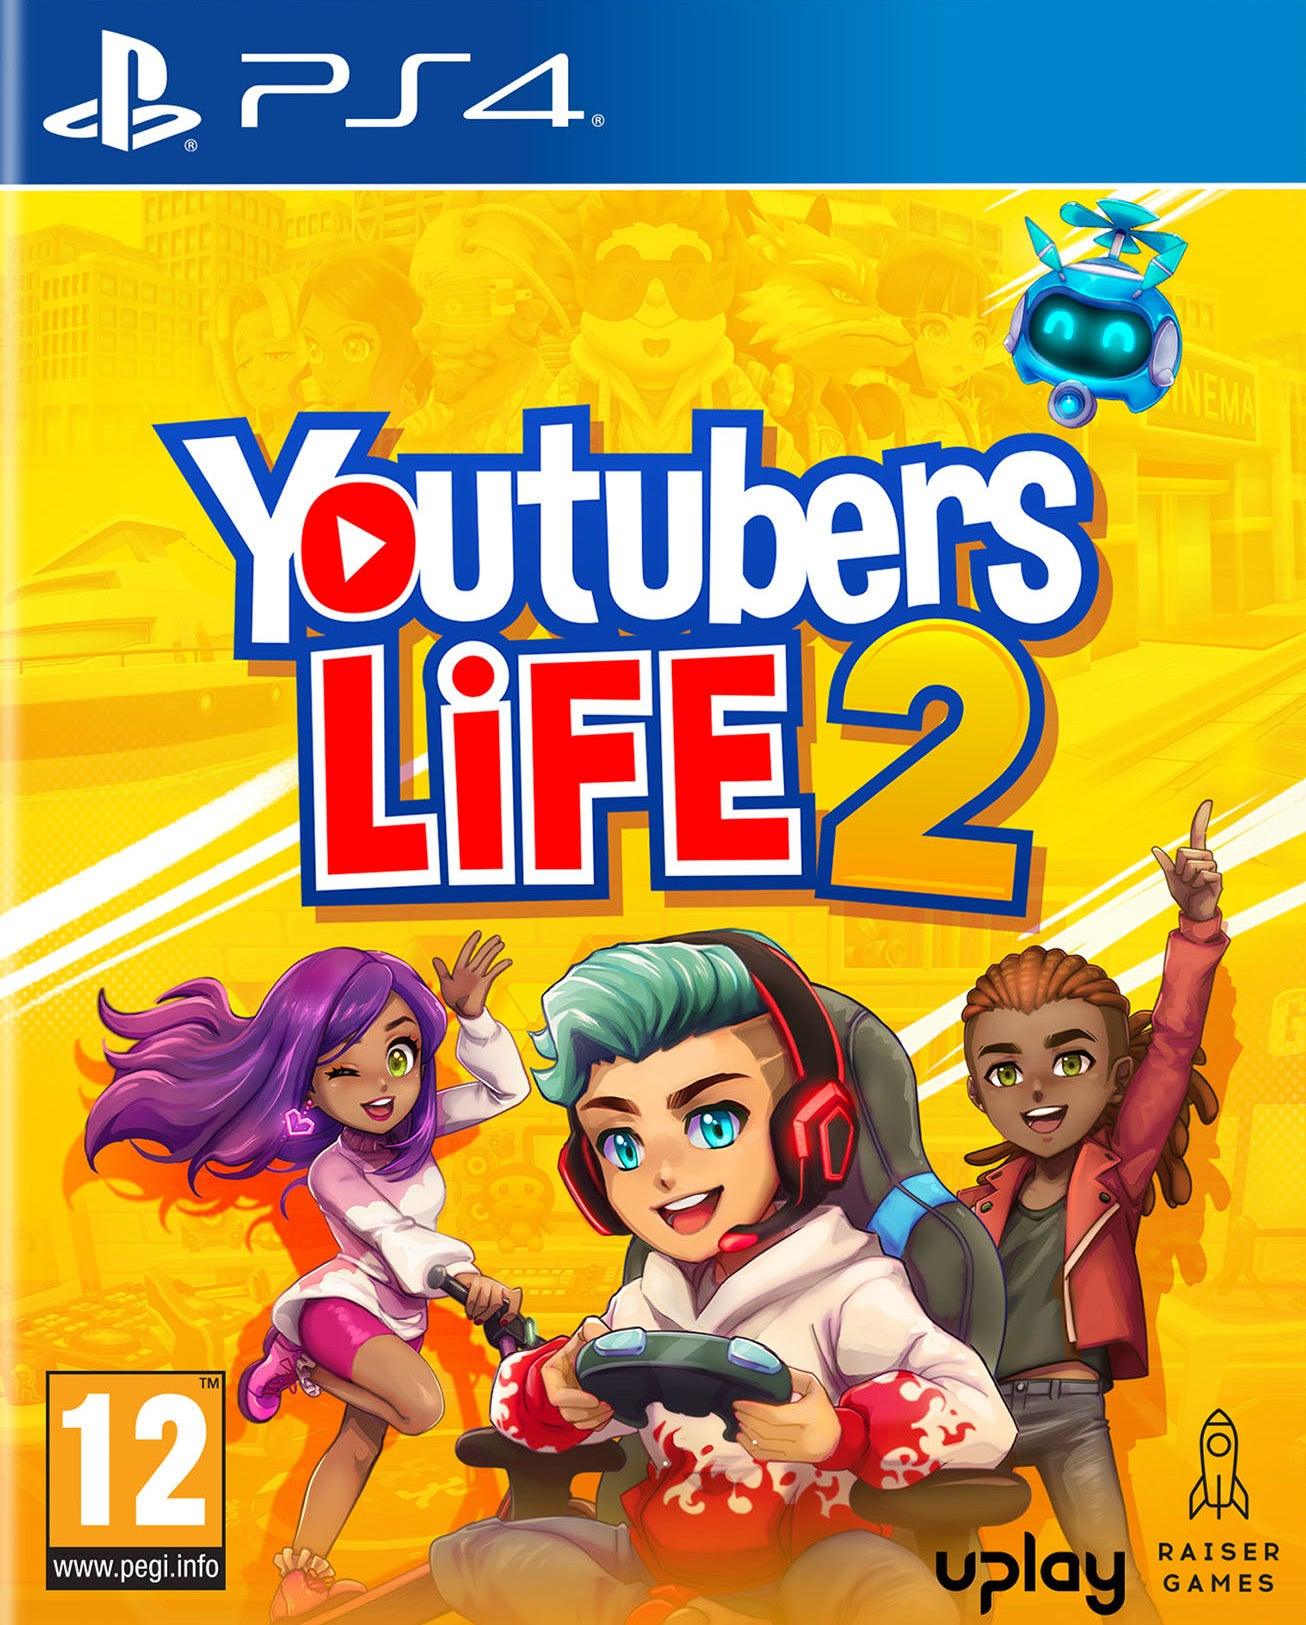 Youtubers Life 2 - Want a New Gadget